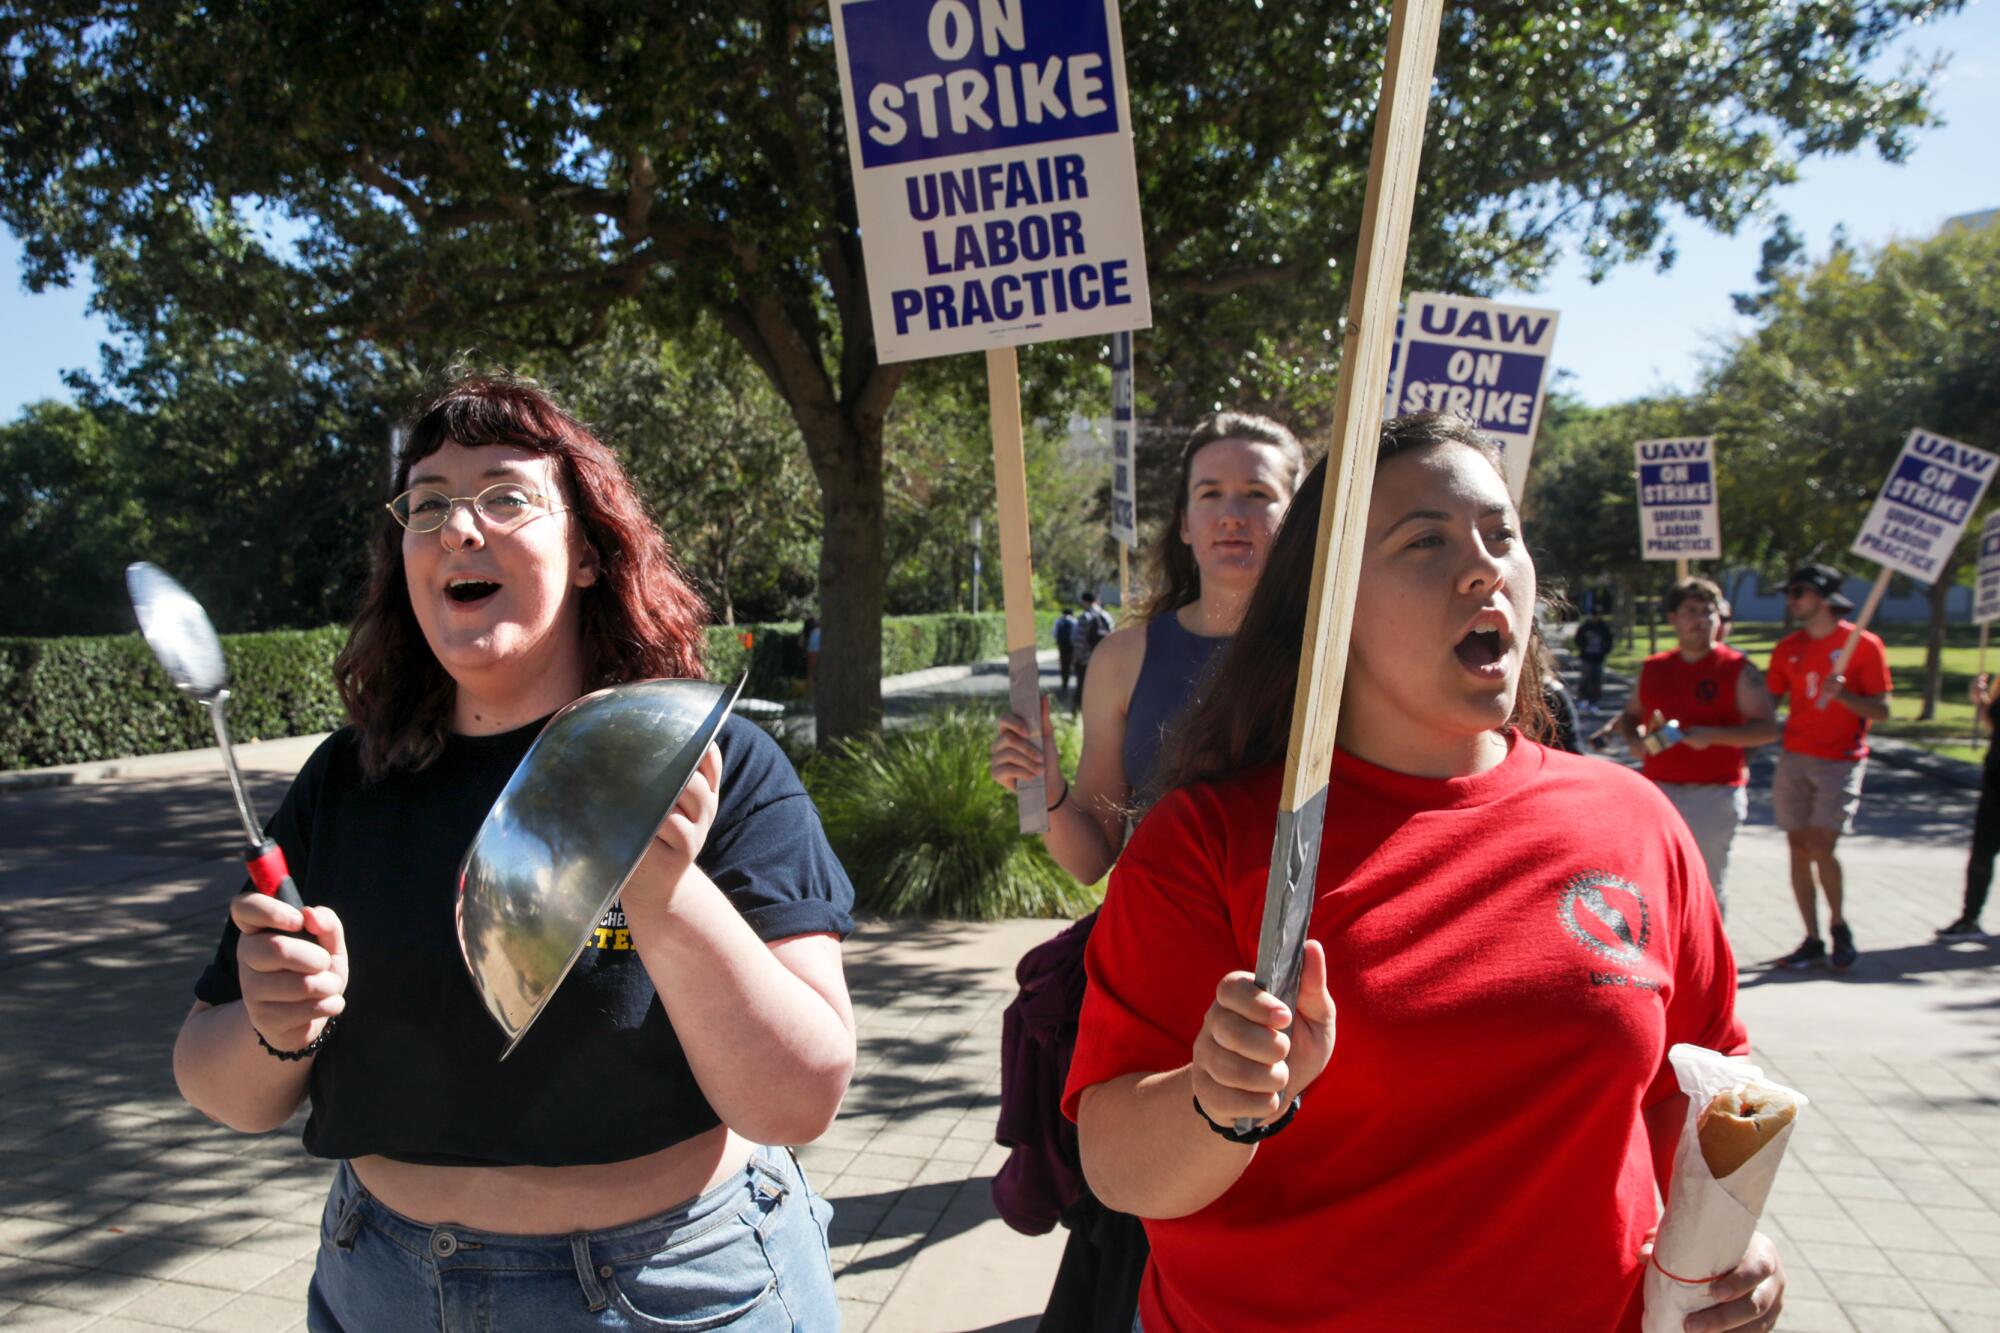 Two young women lead a group of protesters demanding better pay and benefits at a UWA rally at UC Irvine.